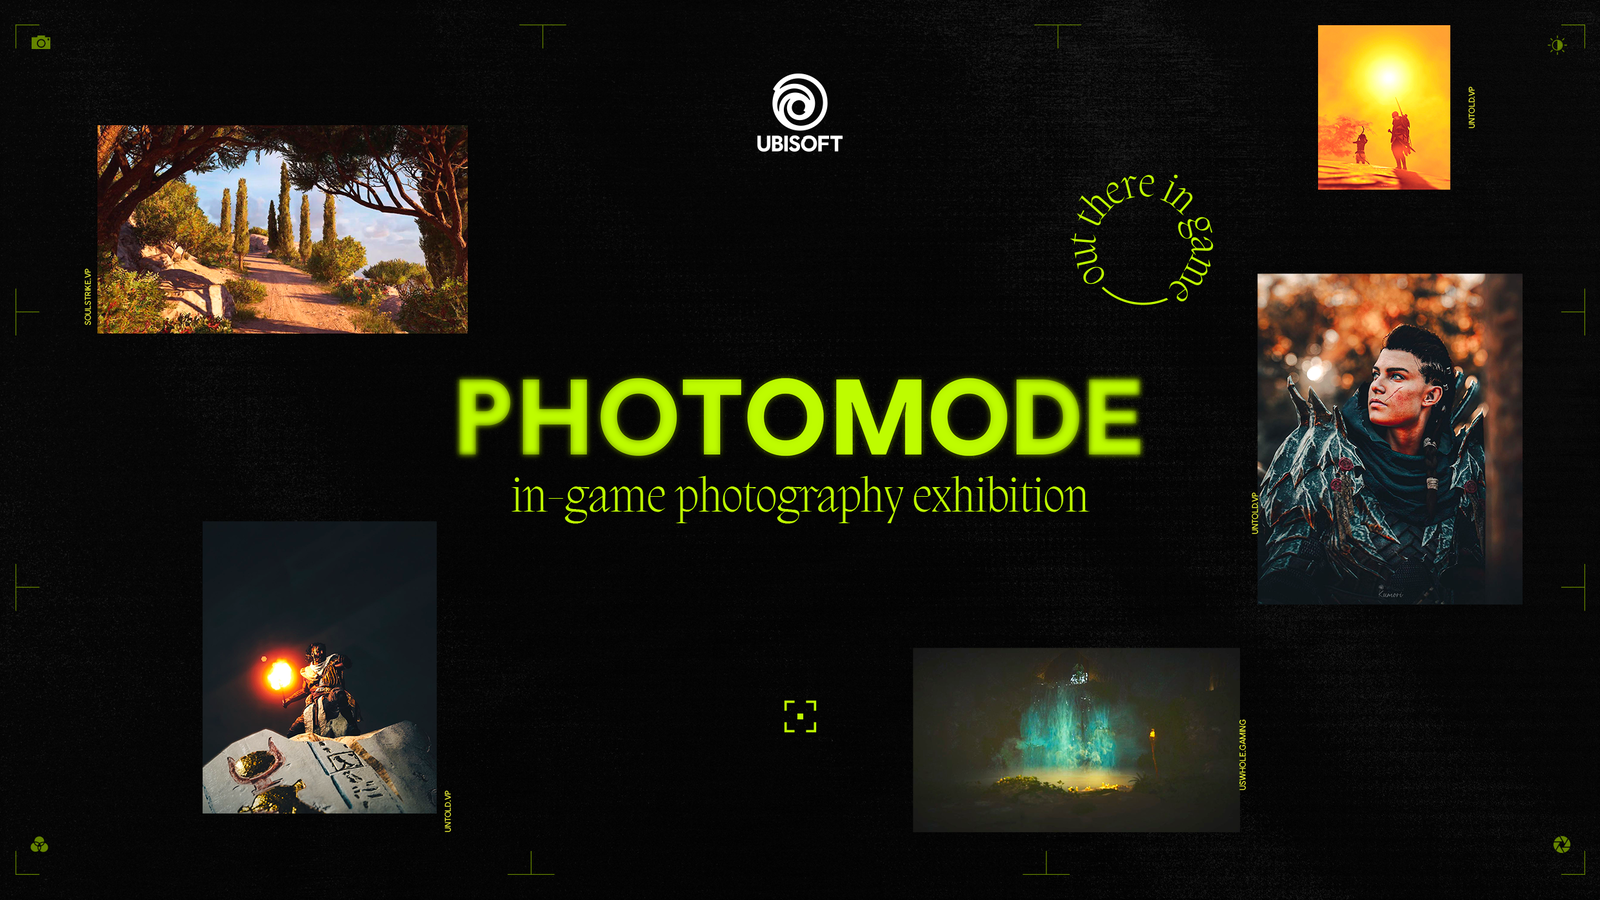 Photomode, Ubisoft’s in-game photography contest